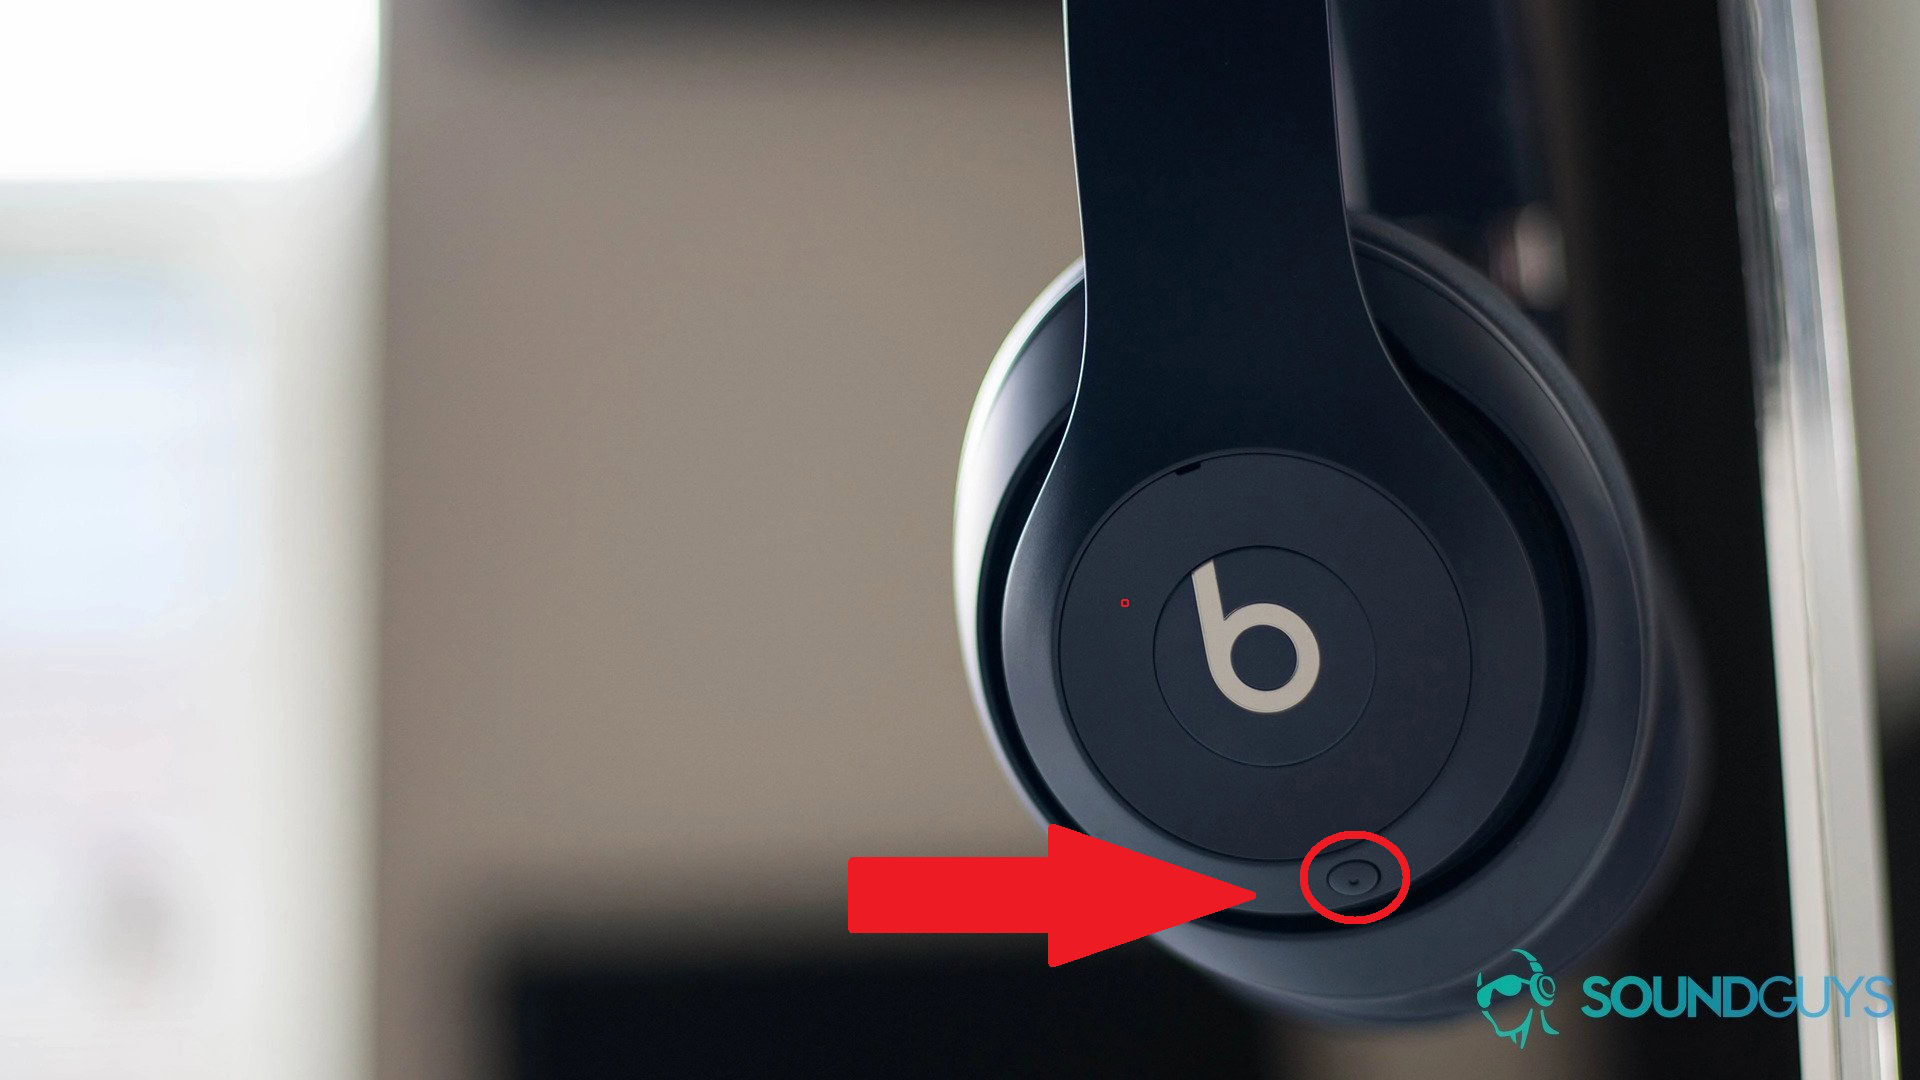 How to turn noise-cancelling on or off on your Beats Studio 3